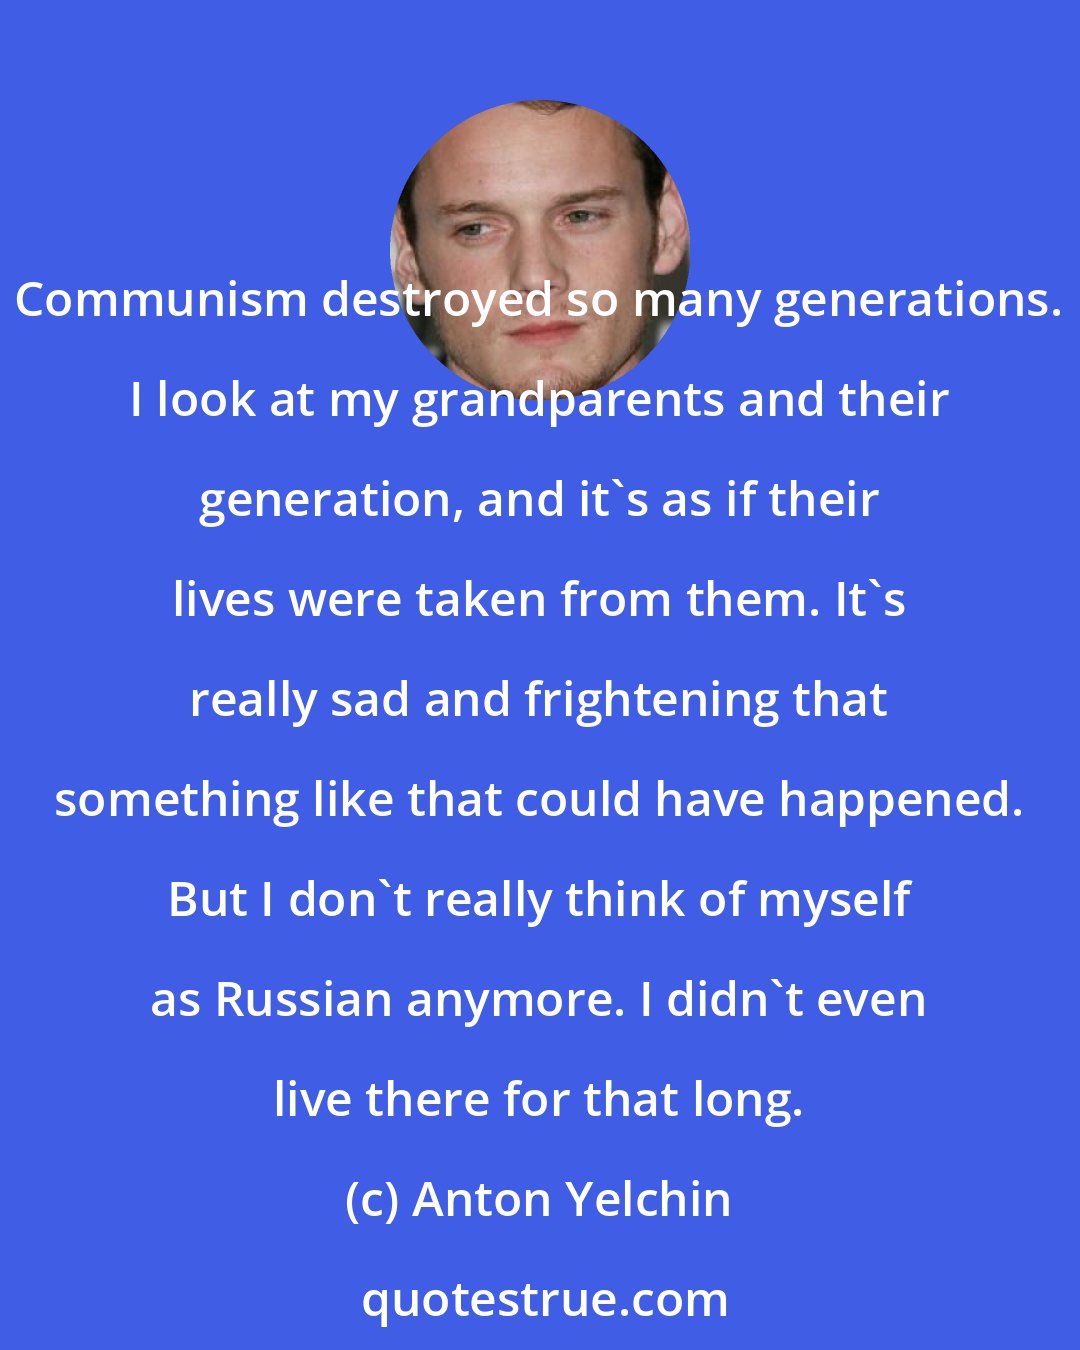 Anton Yelchin: Communism destroyed so many generations. I look at my grandparents and their generation, and it's as if their lives were taken from them. It's really sad and frightening that something like that could have happened. But I don't really think of myself as Russian anymore. I didn't even live there for that long.